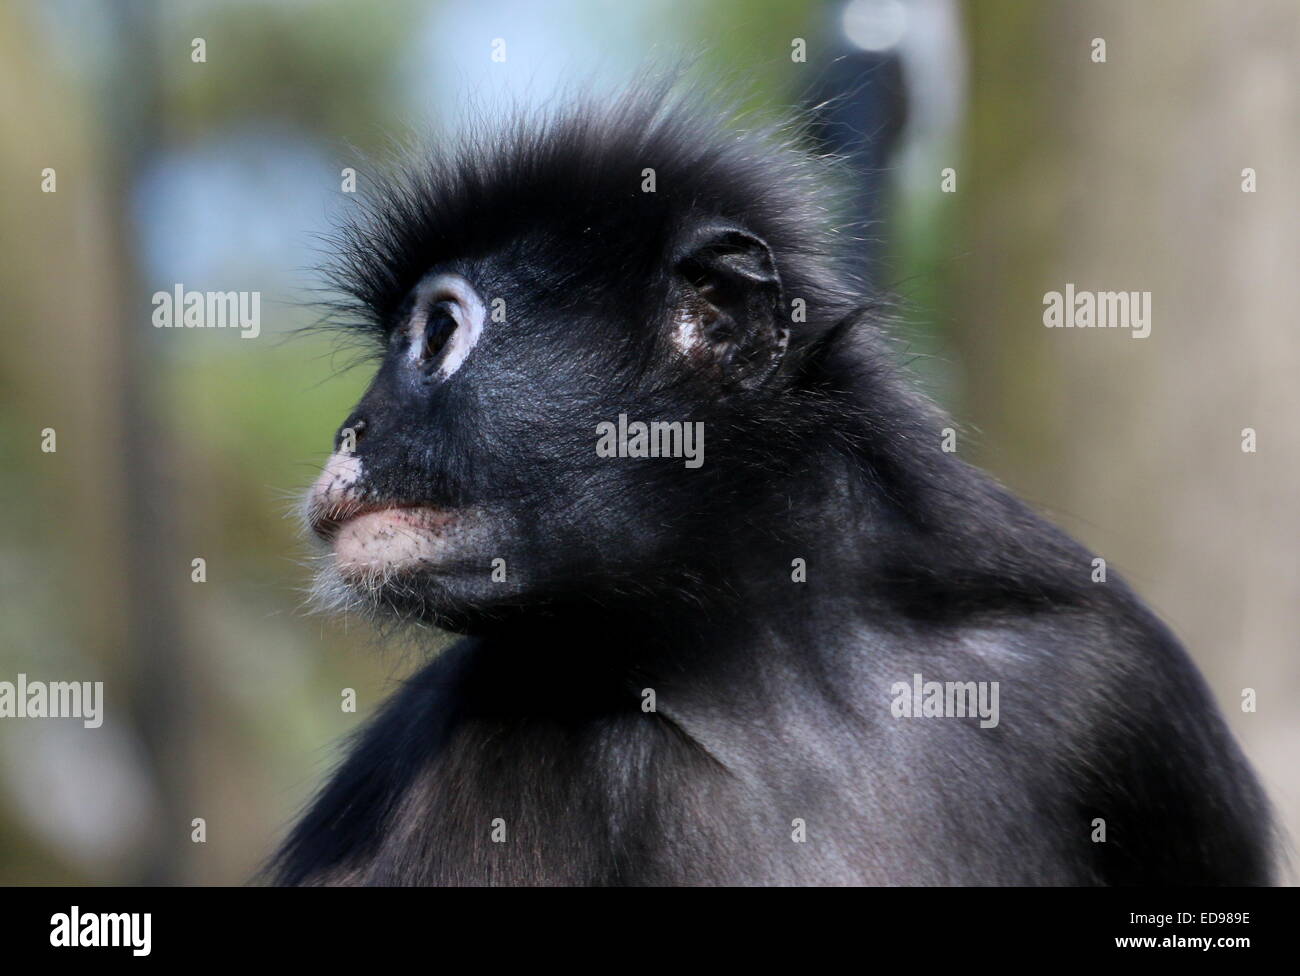 Portrait of a Southeast Asian Dusky leaf monkey (Trachypithecus obscurus). A.k.a Spectacled langur or spectacled leaf monkey Stock Photo